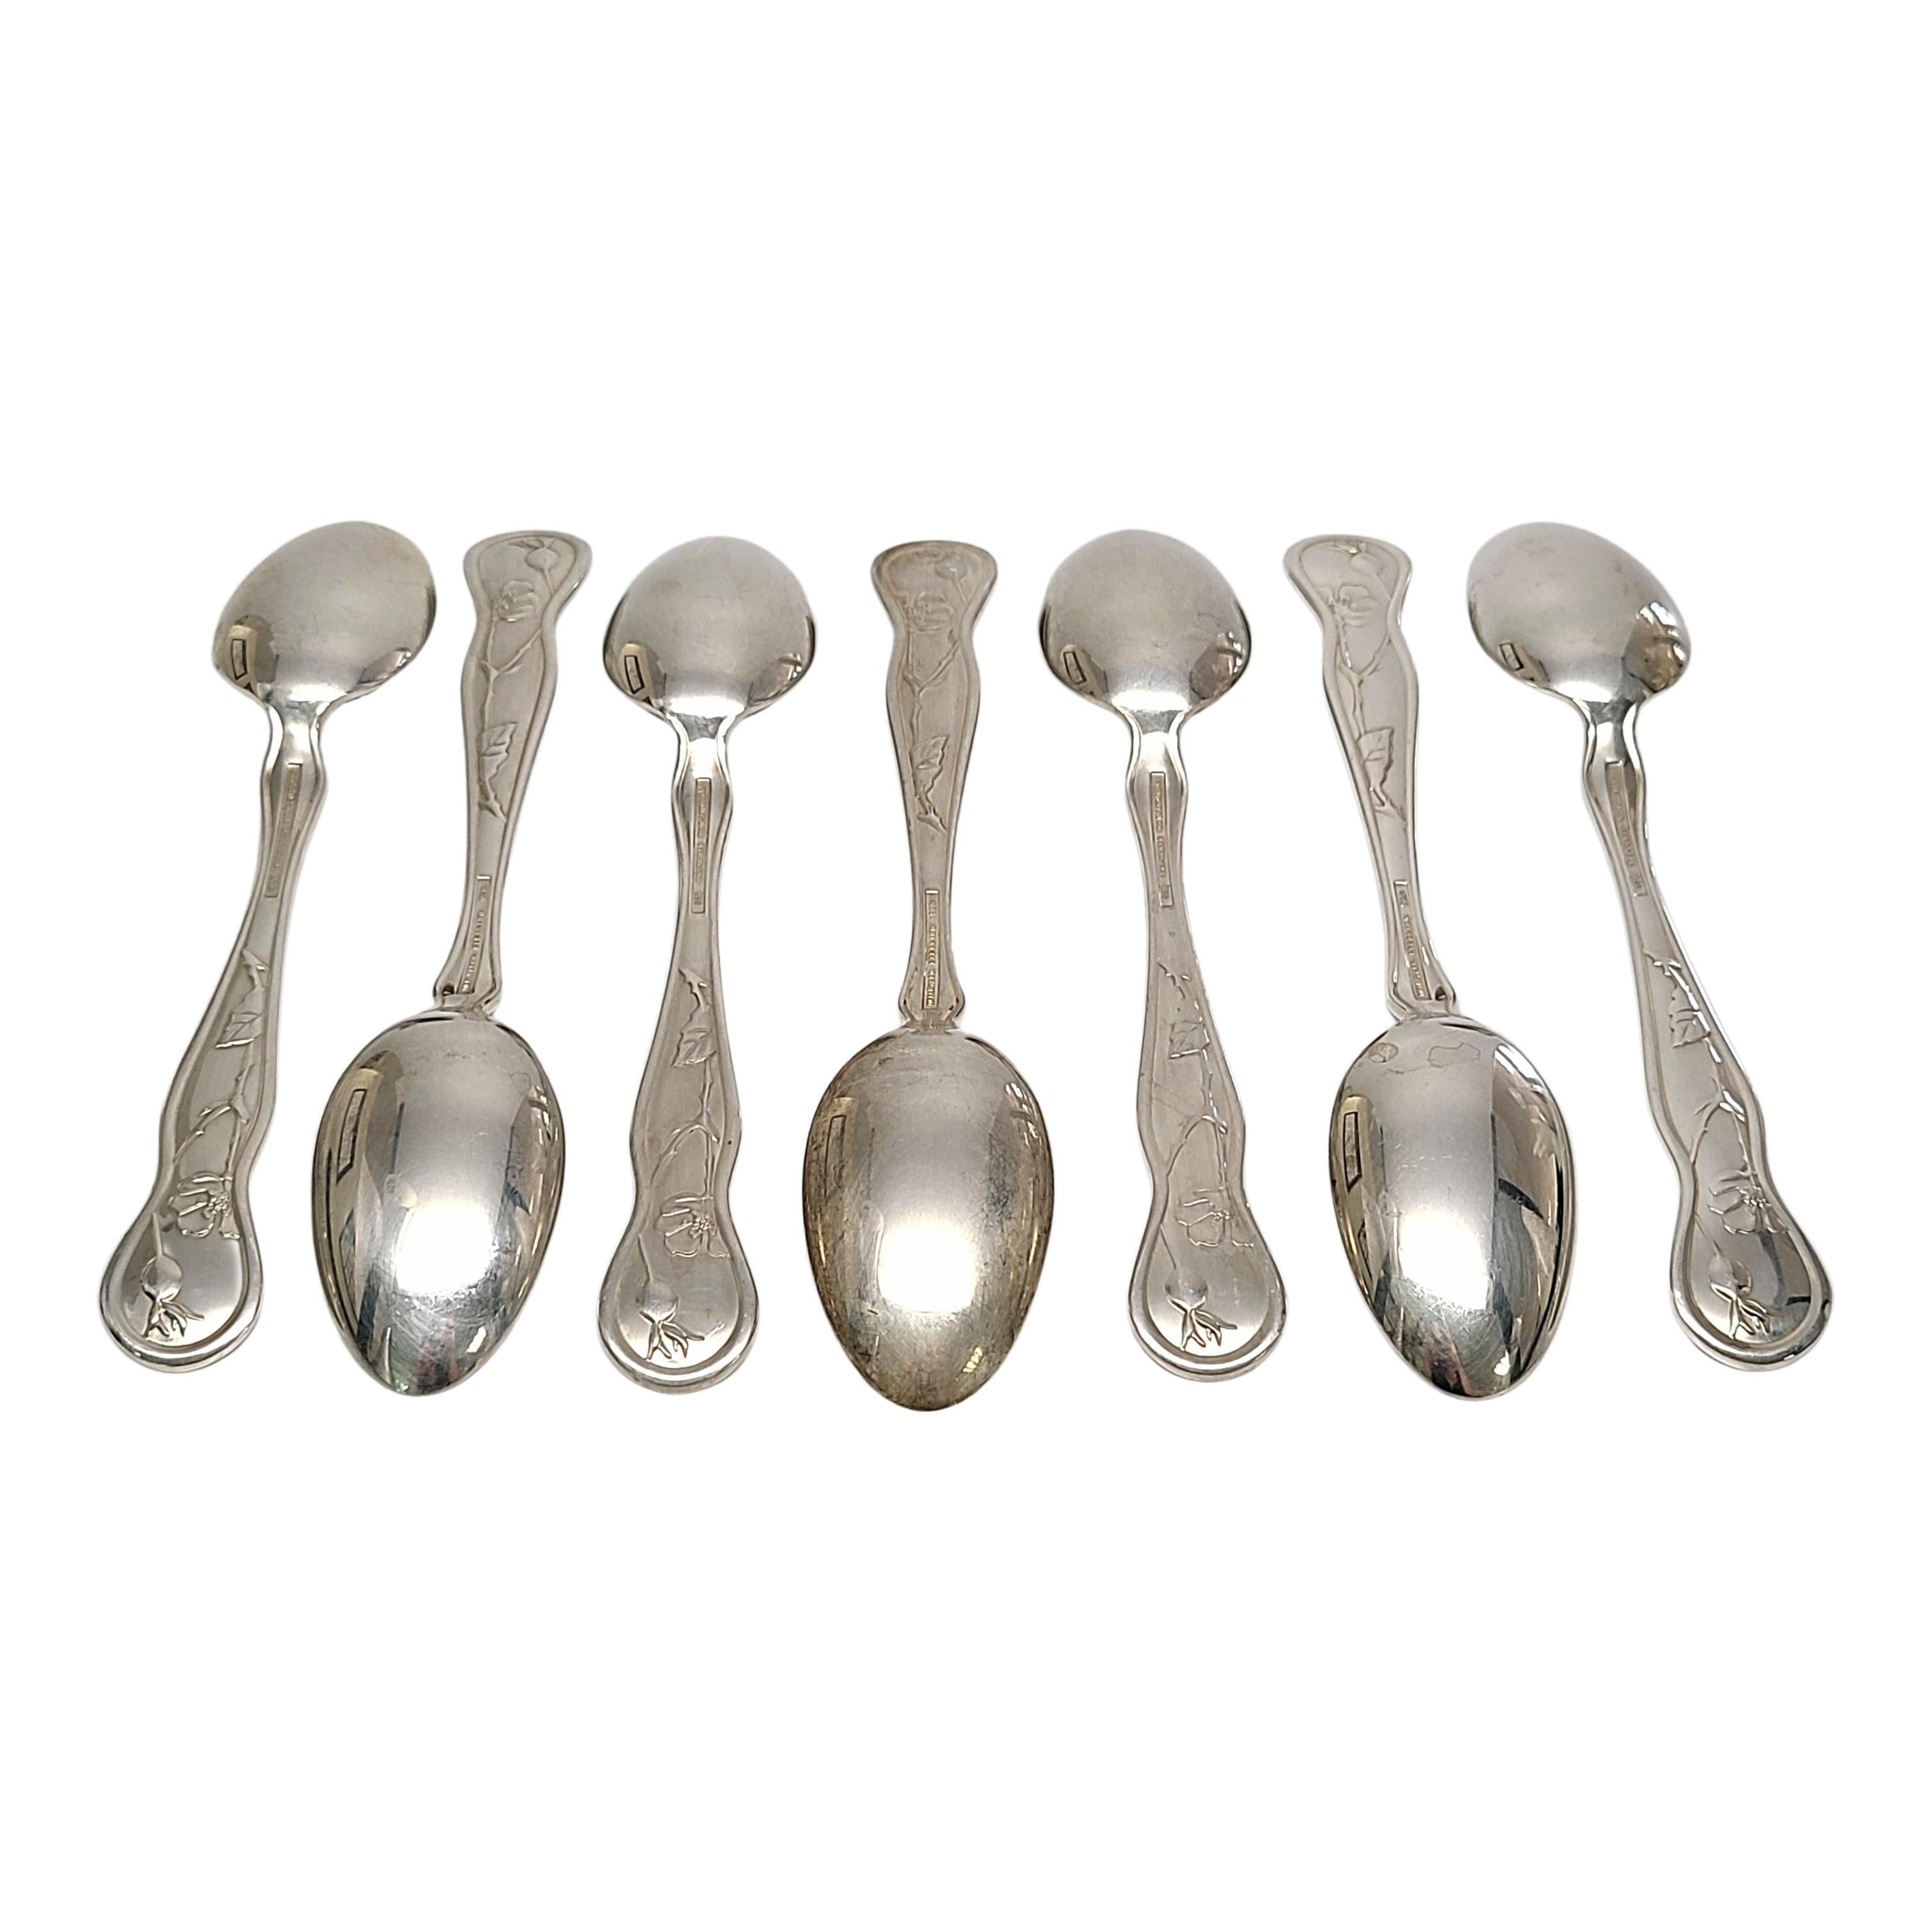 Set of 7 sterling silver teaspoons by Tiffany & Co in the American Garden pattern.

No monogram

American Garden is a multi-motif pattern inspired by the extensive botanical beauty of the United States. Does not include Tiffany box or